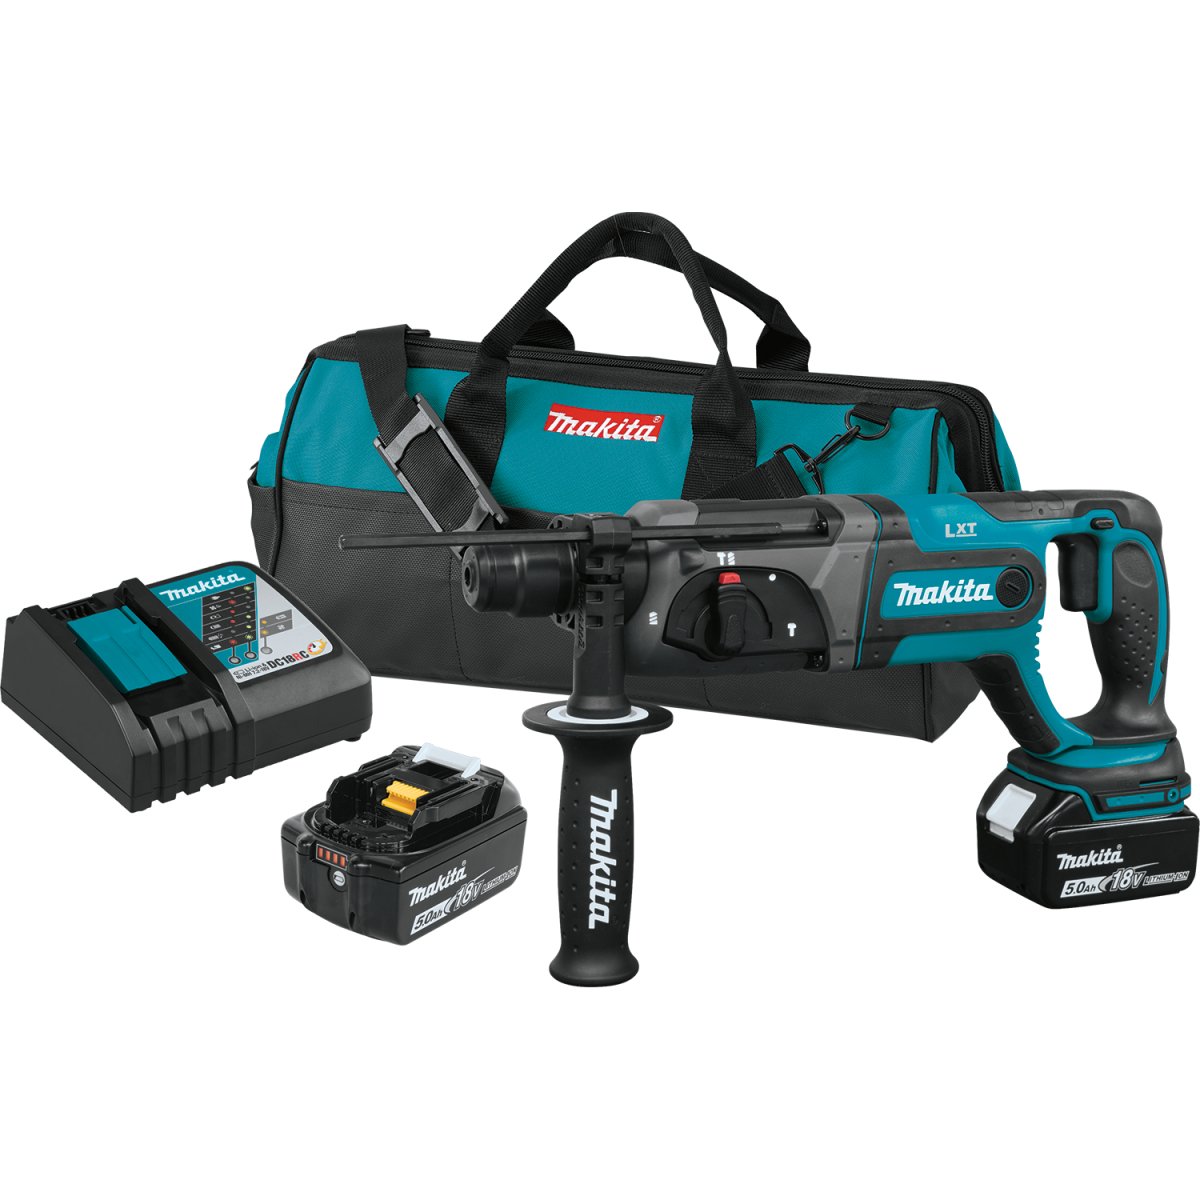 18V LXT® Lithium‑Ion Cordless 7/8" Rotary Hammer, Accepts SDS‑PLUS Bits - Diamond Tool Store